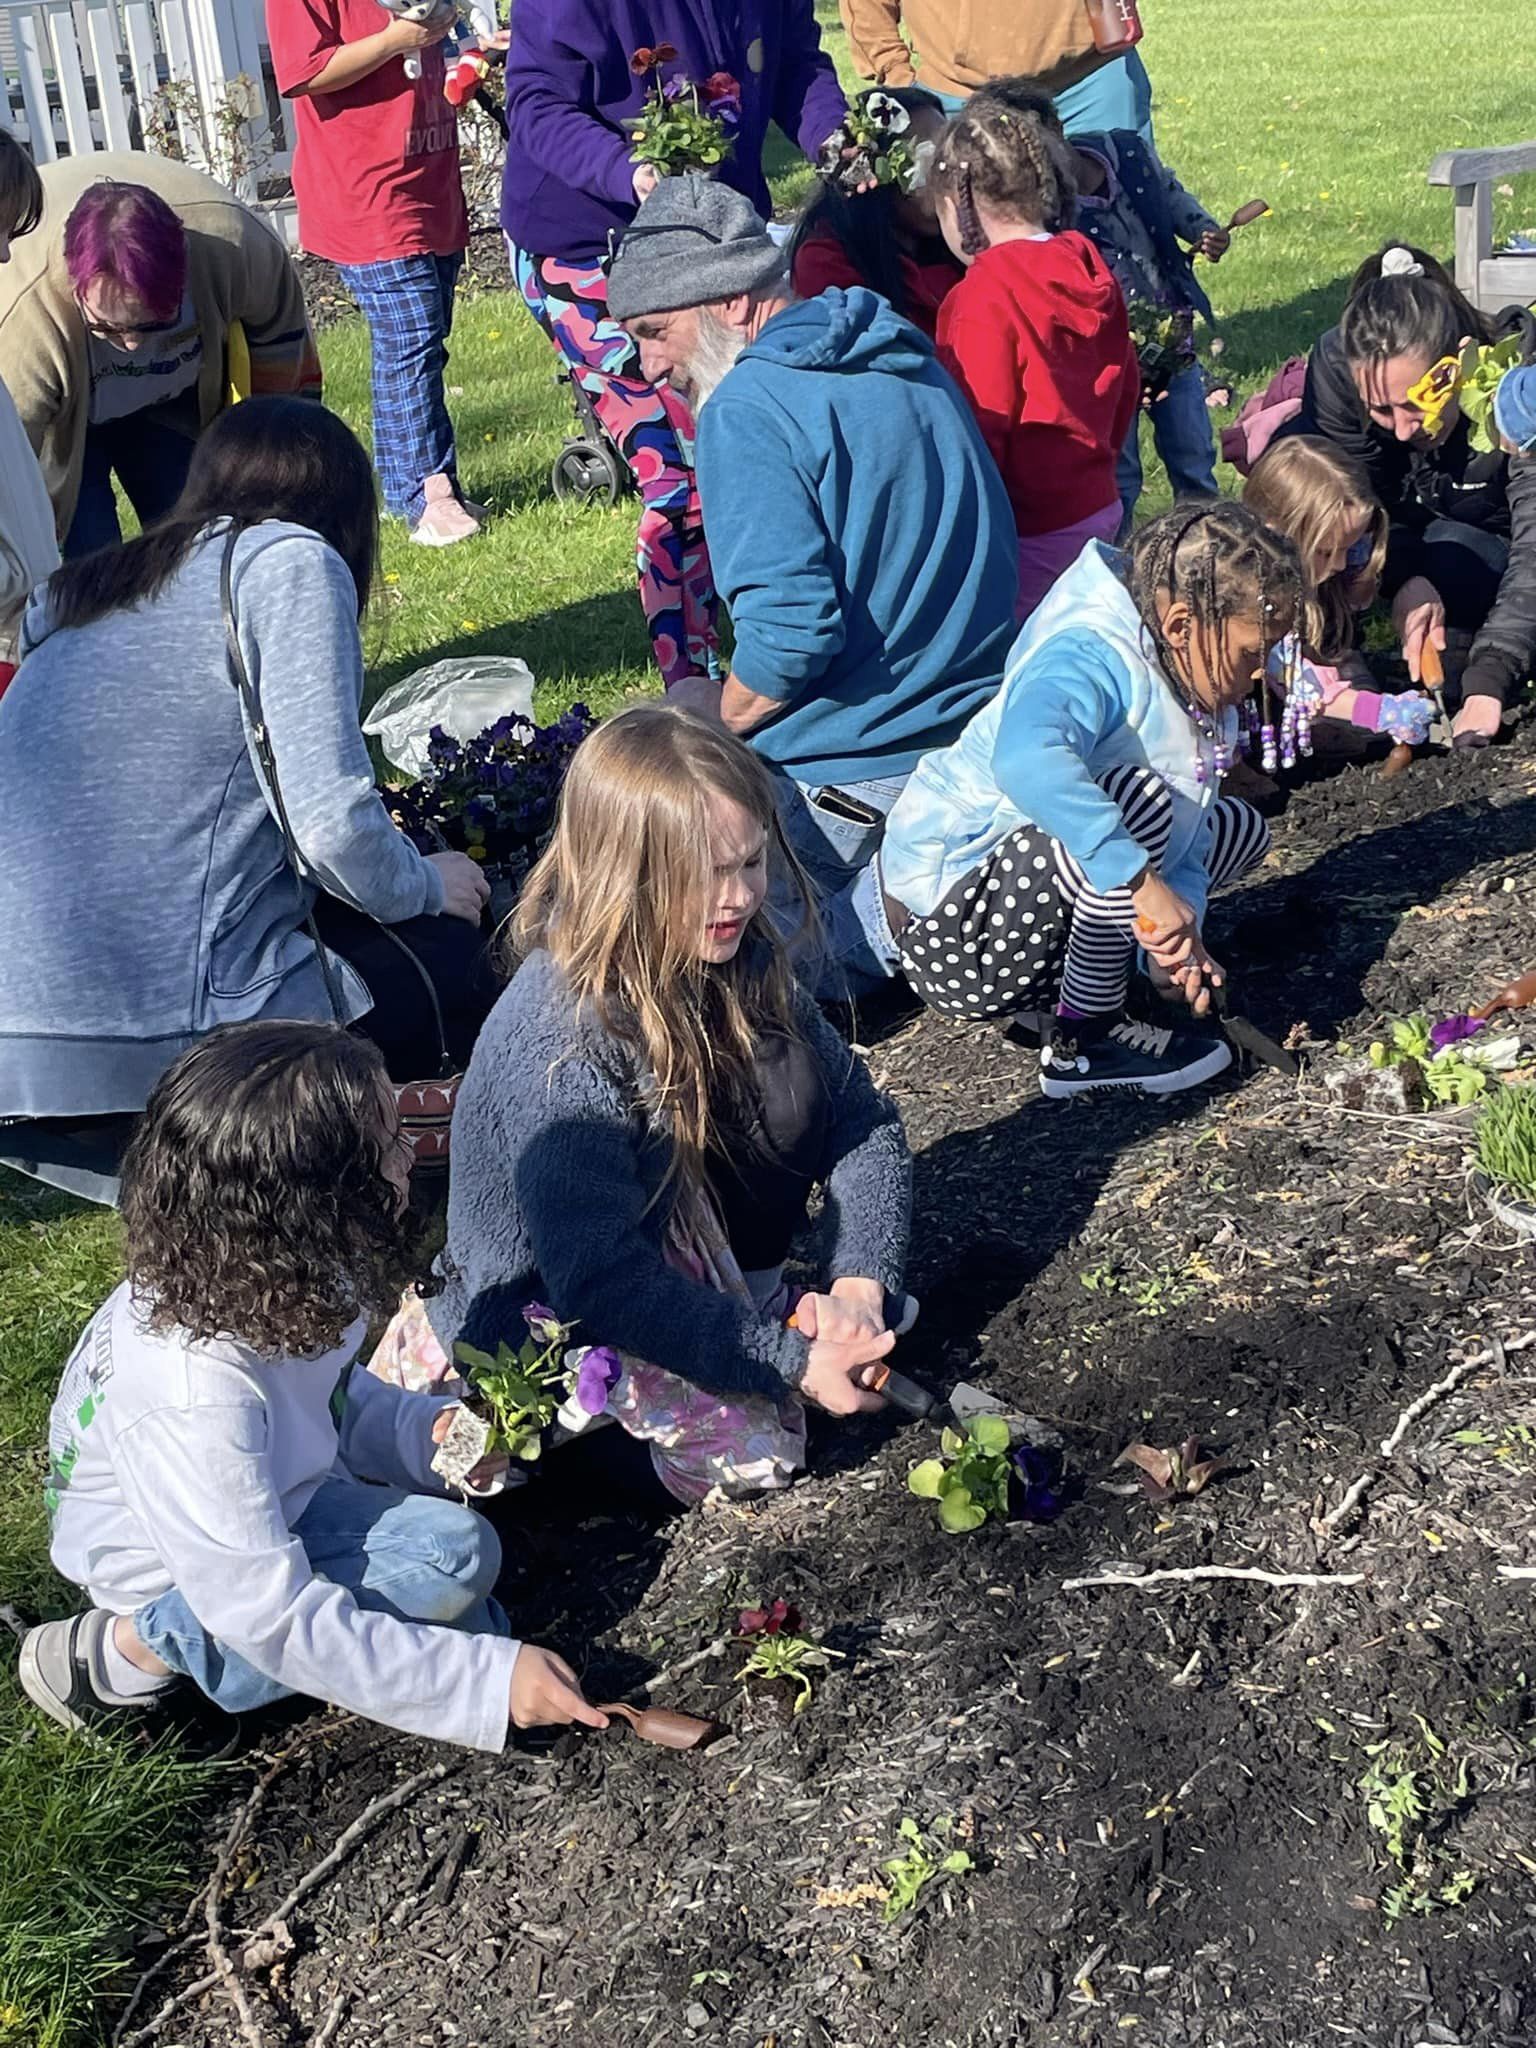 Group of children planting flowers in a bed